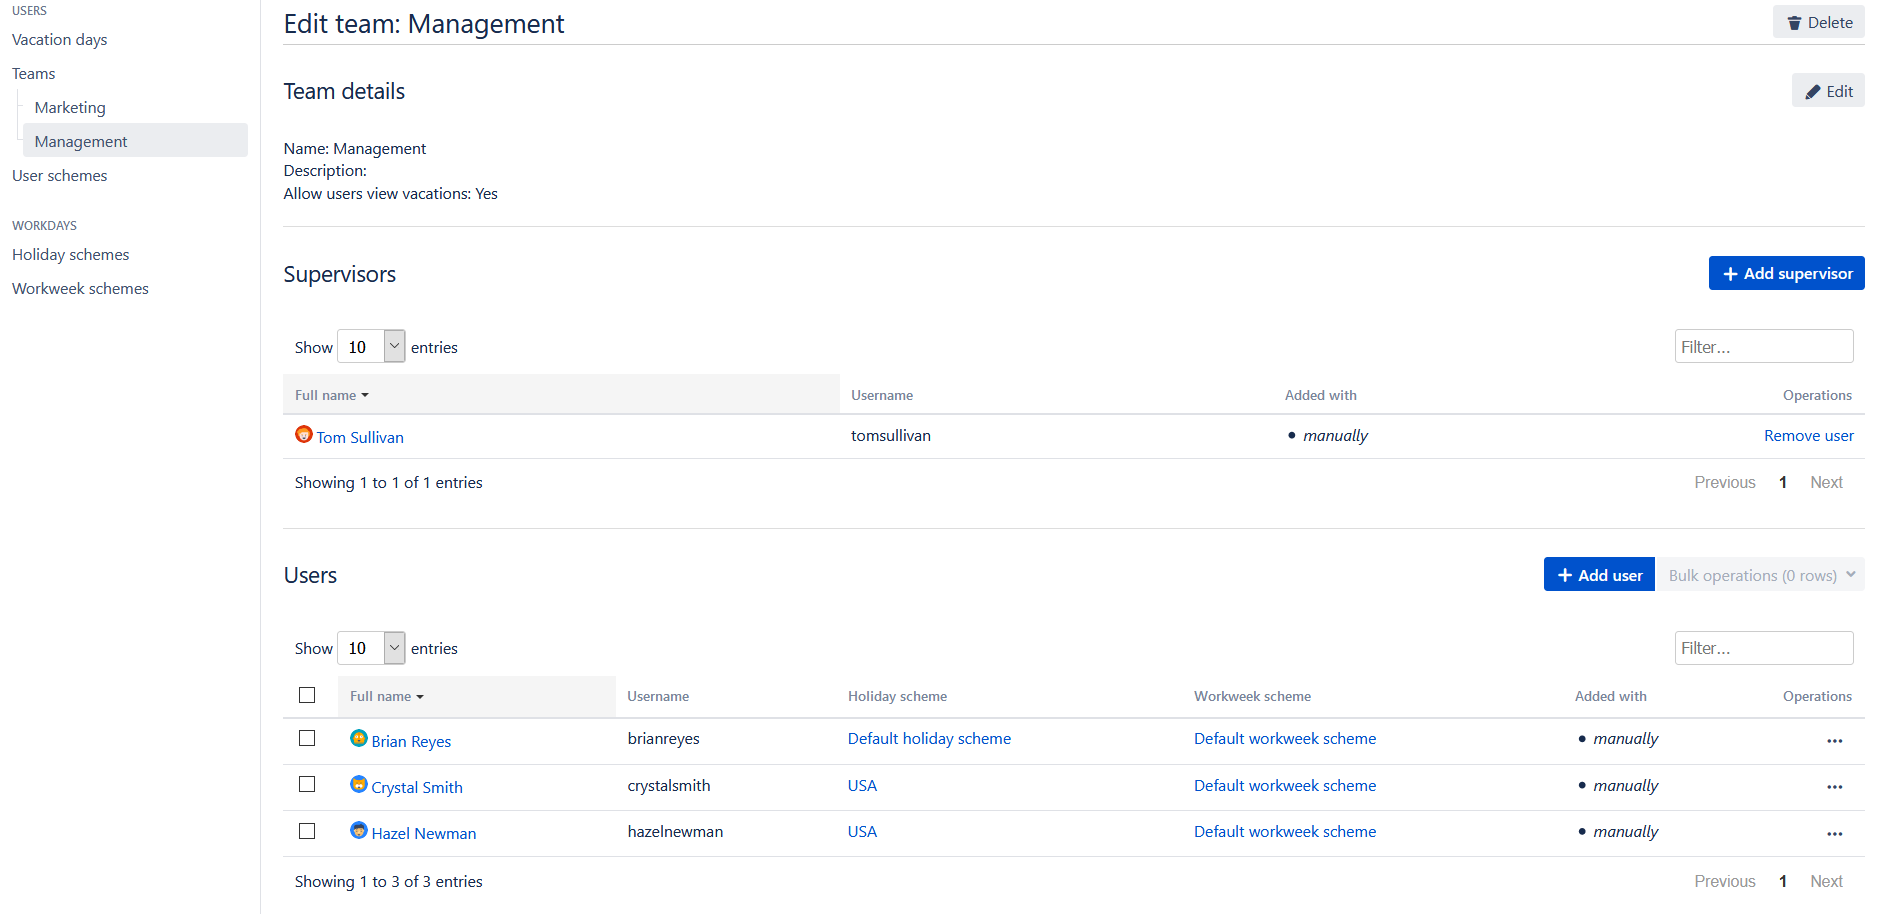 Edditing teams in Vacation Manager for Jira